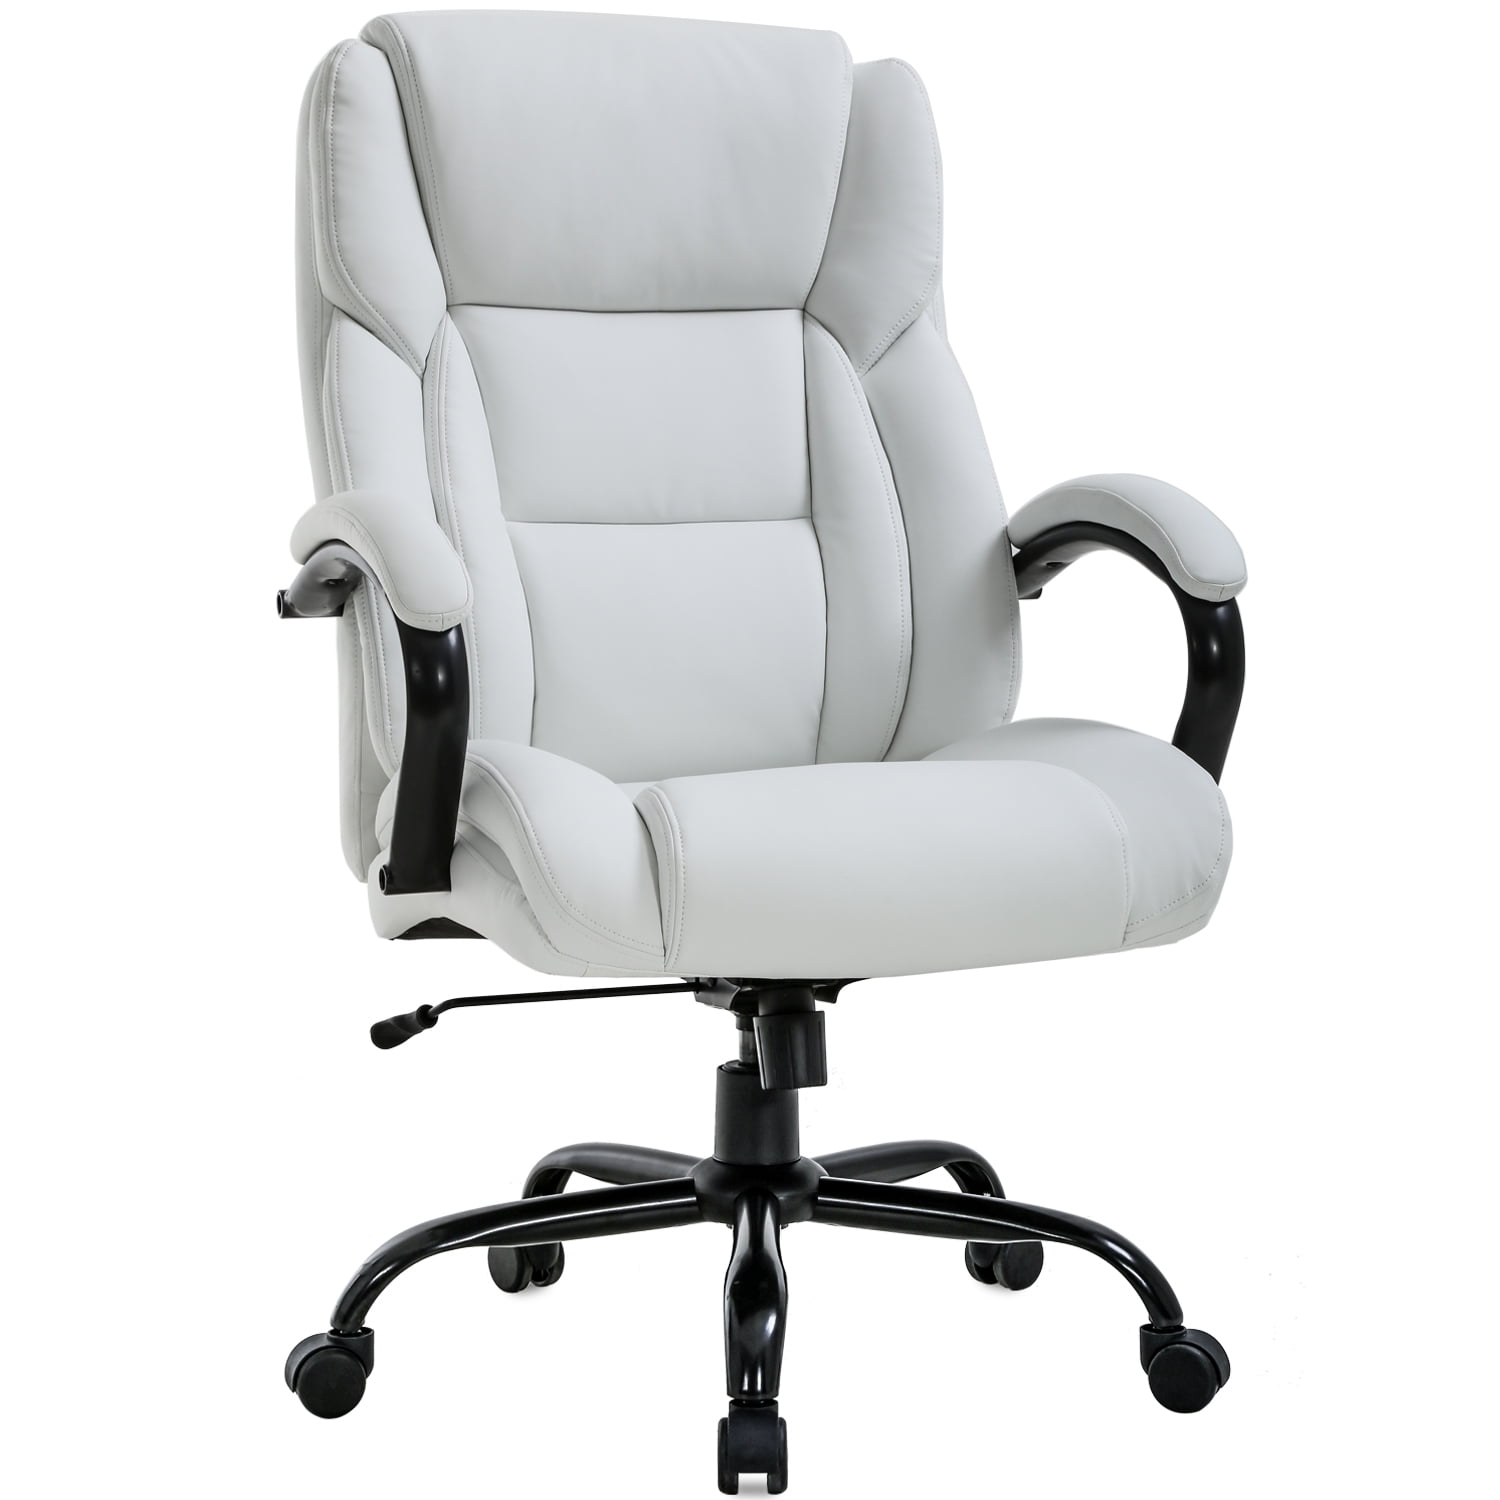 Home Office Chair PU Leather Desk Gaming Chair Adjustable Seat Height Business 